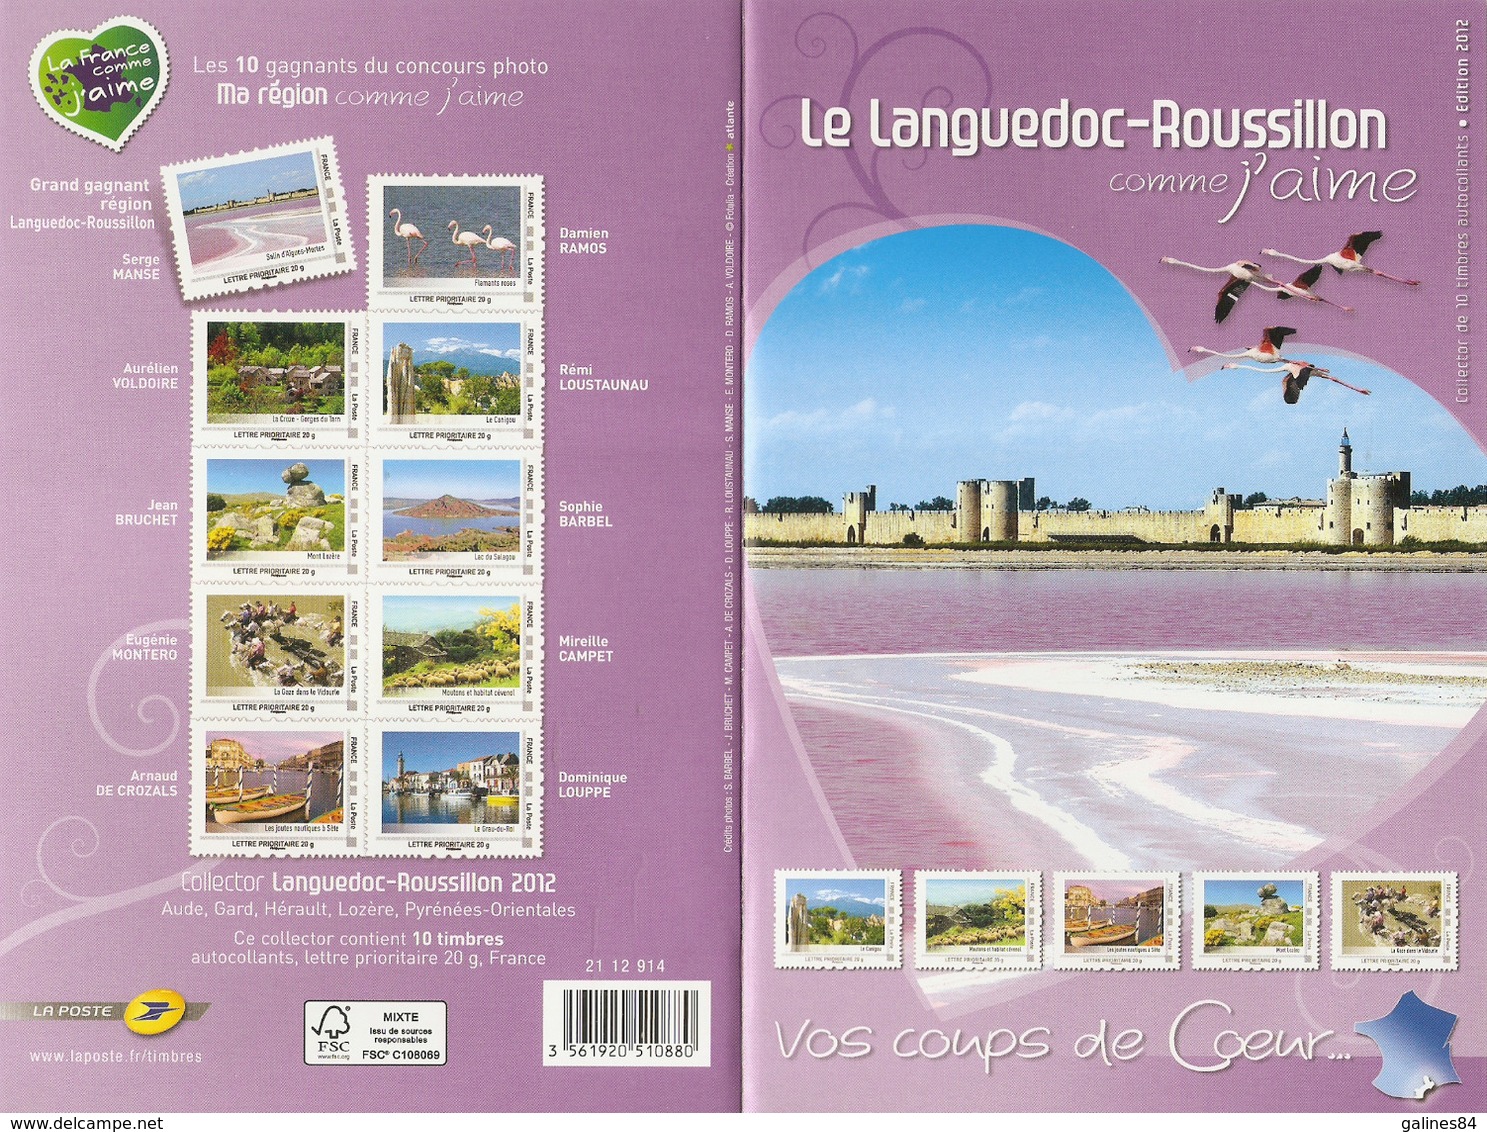 COLLECTOR LANGUEDOC-ROUSSILLON 2012 - Collectors